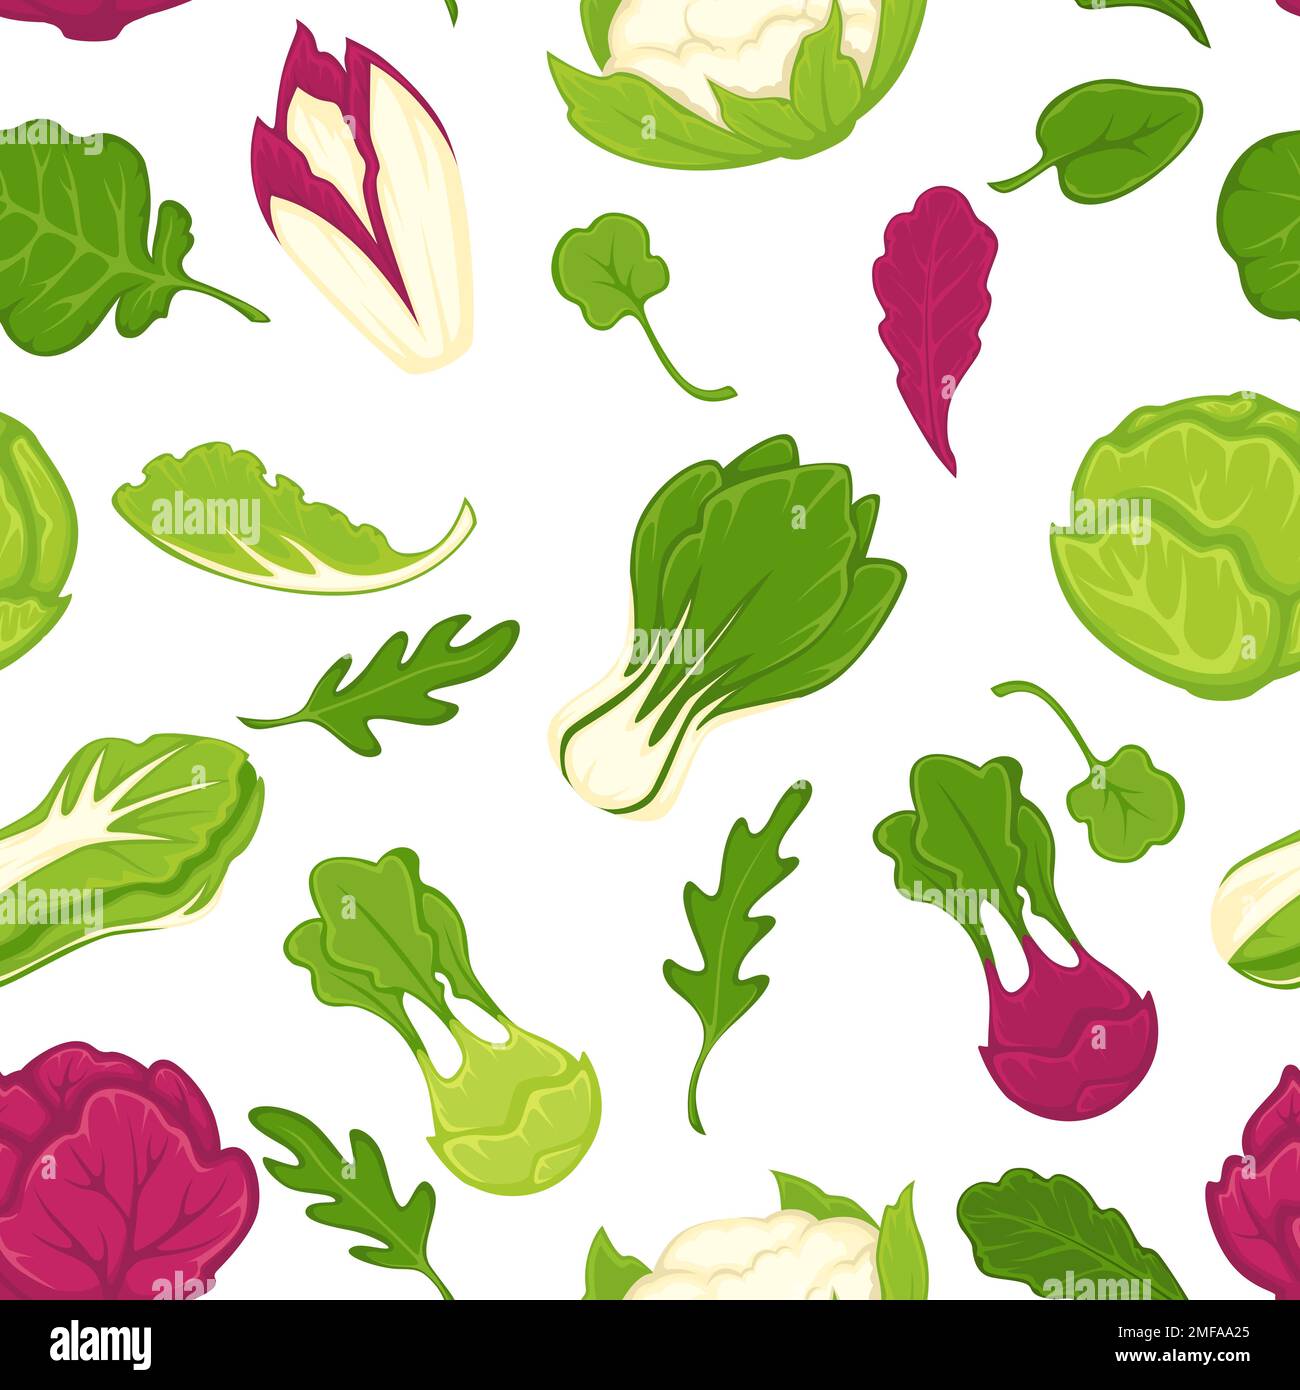 Lettuce and salad leaves parsley herbs and greenery for seasoning Stock Vector